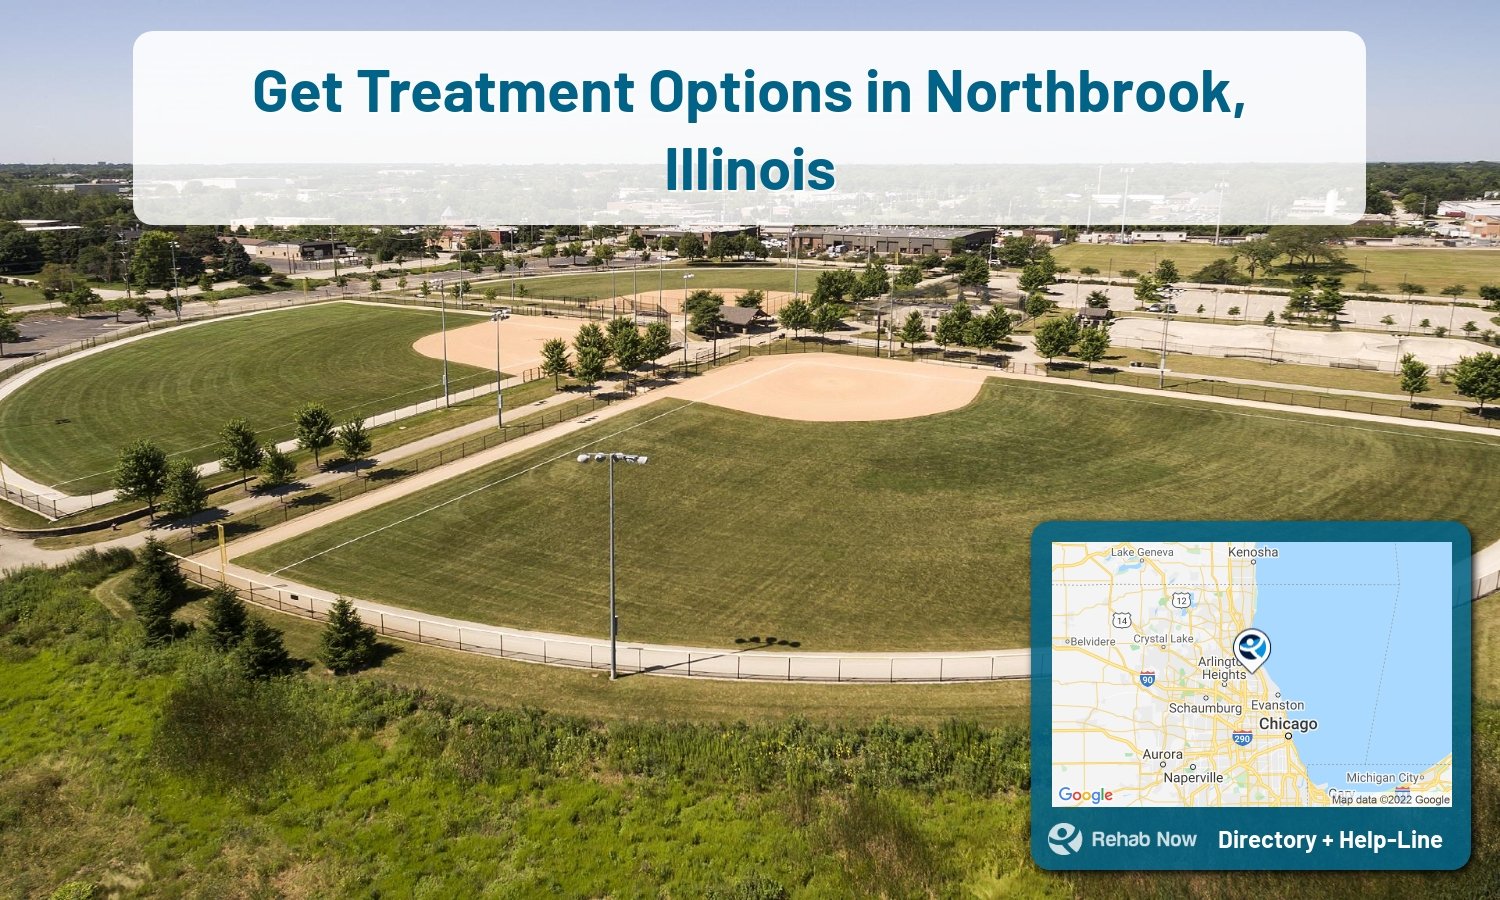 Drug rehab and alcohol treatment services nearby Northbrook, IL. Need help choosing a treatment program? Call our free hotline!